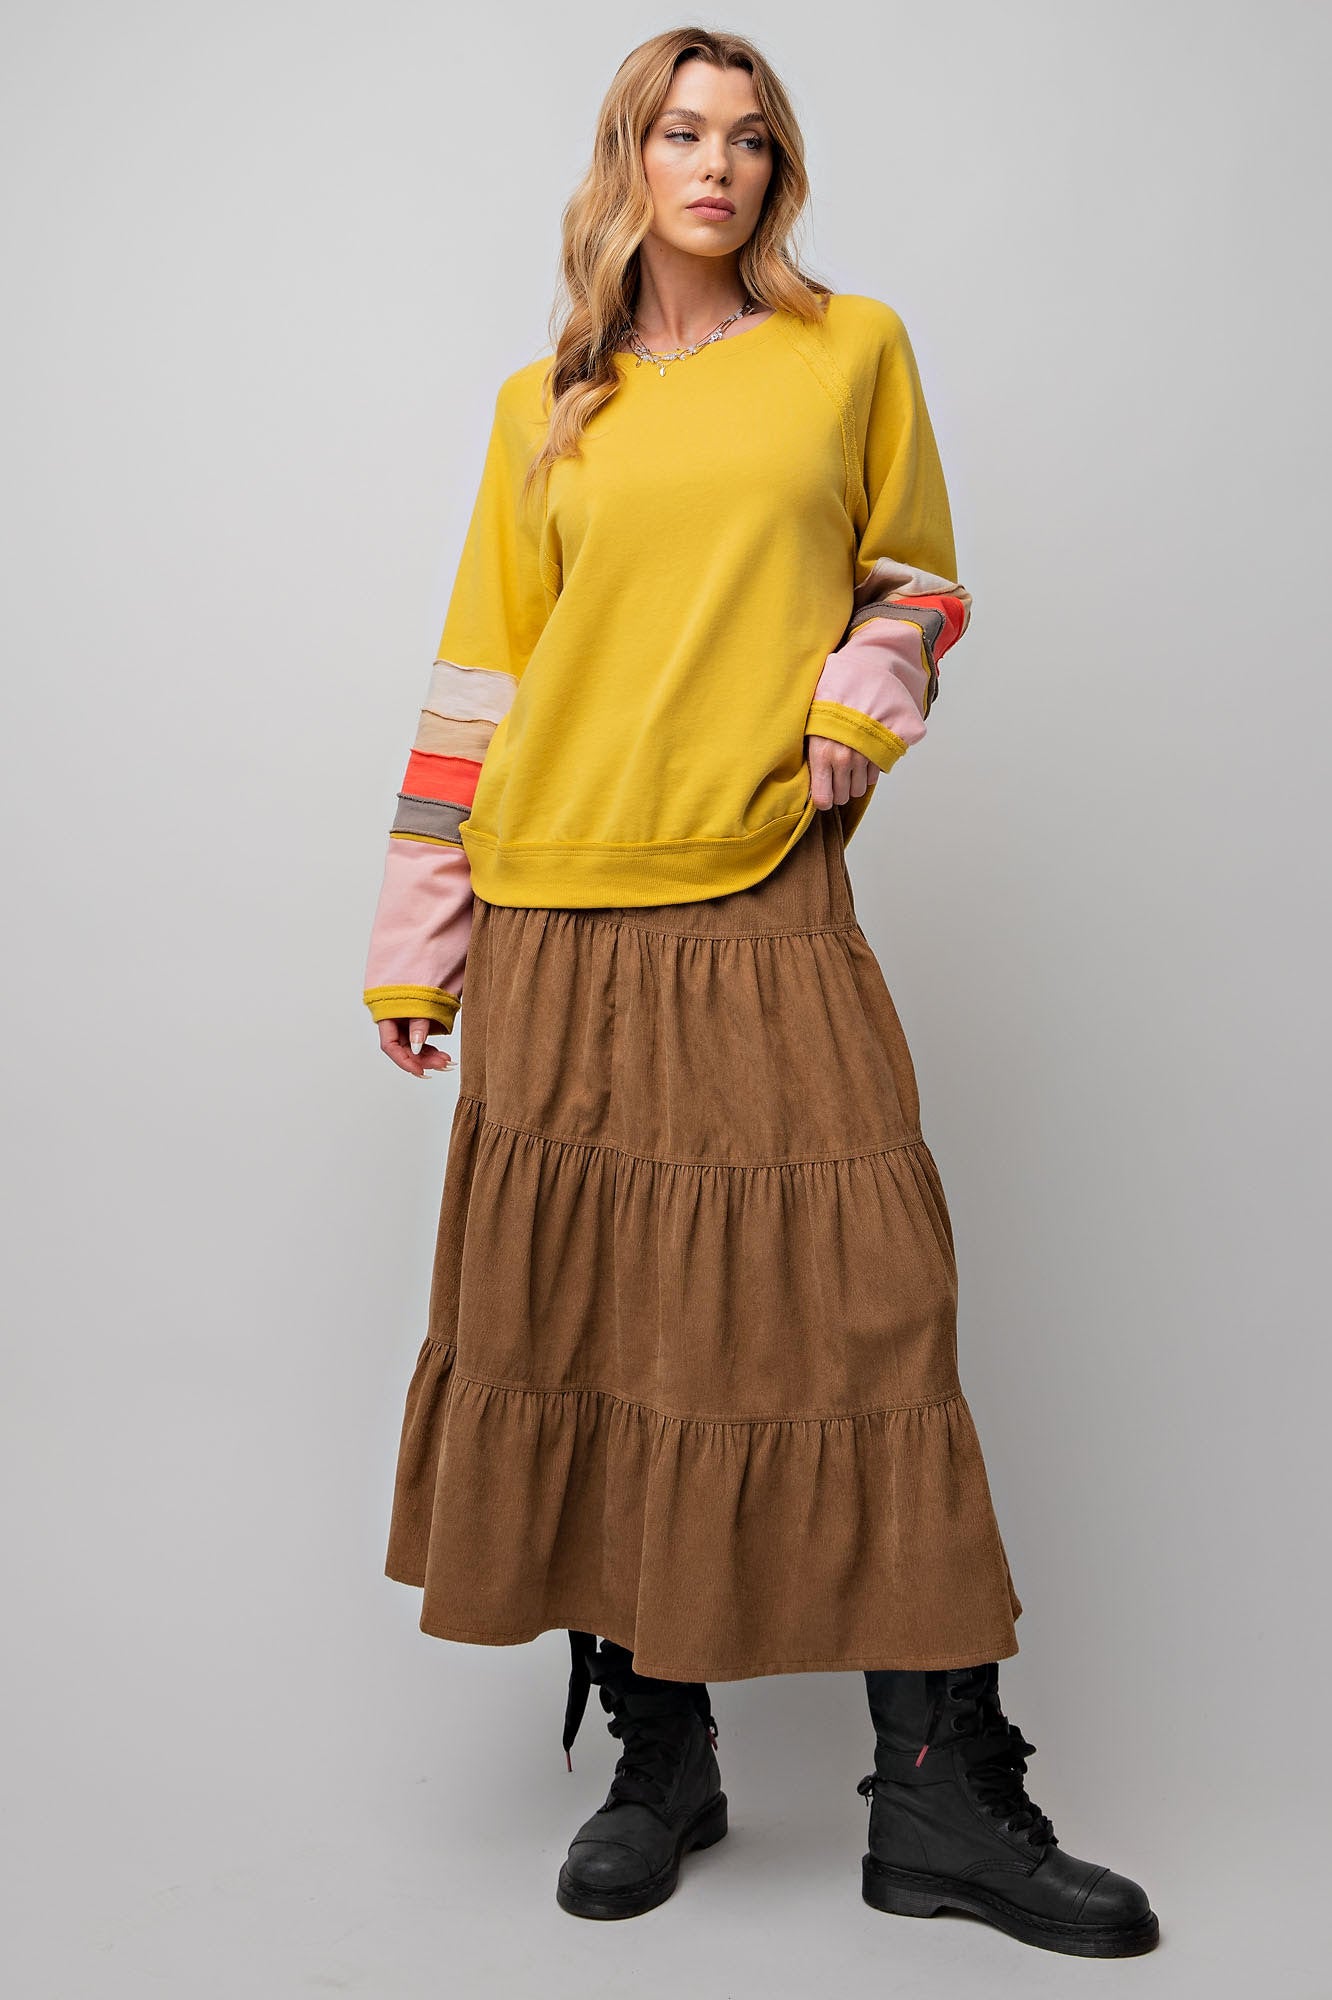 Traci Terry Knit Pullover in Sunflower